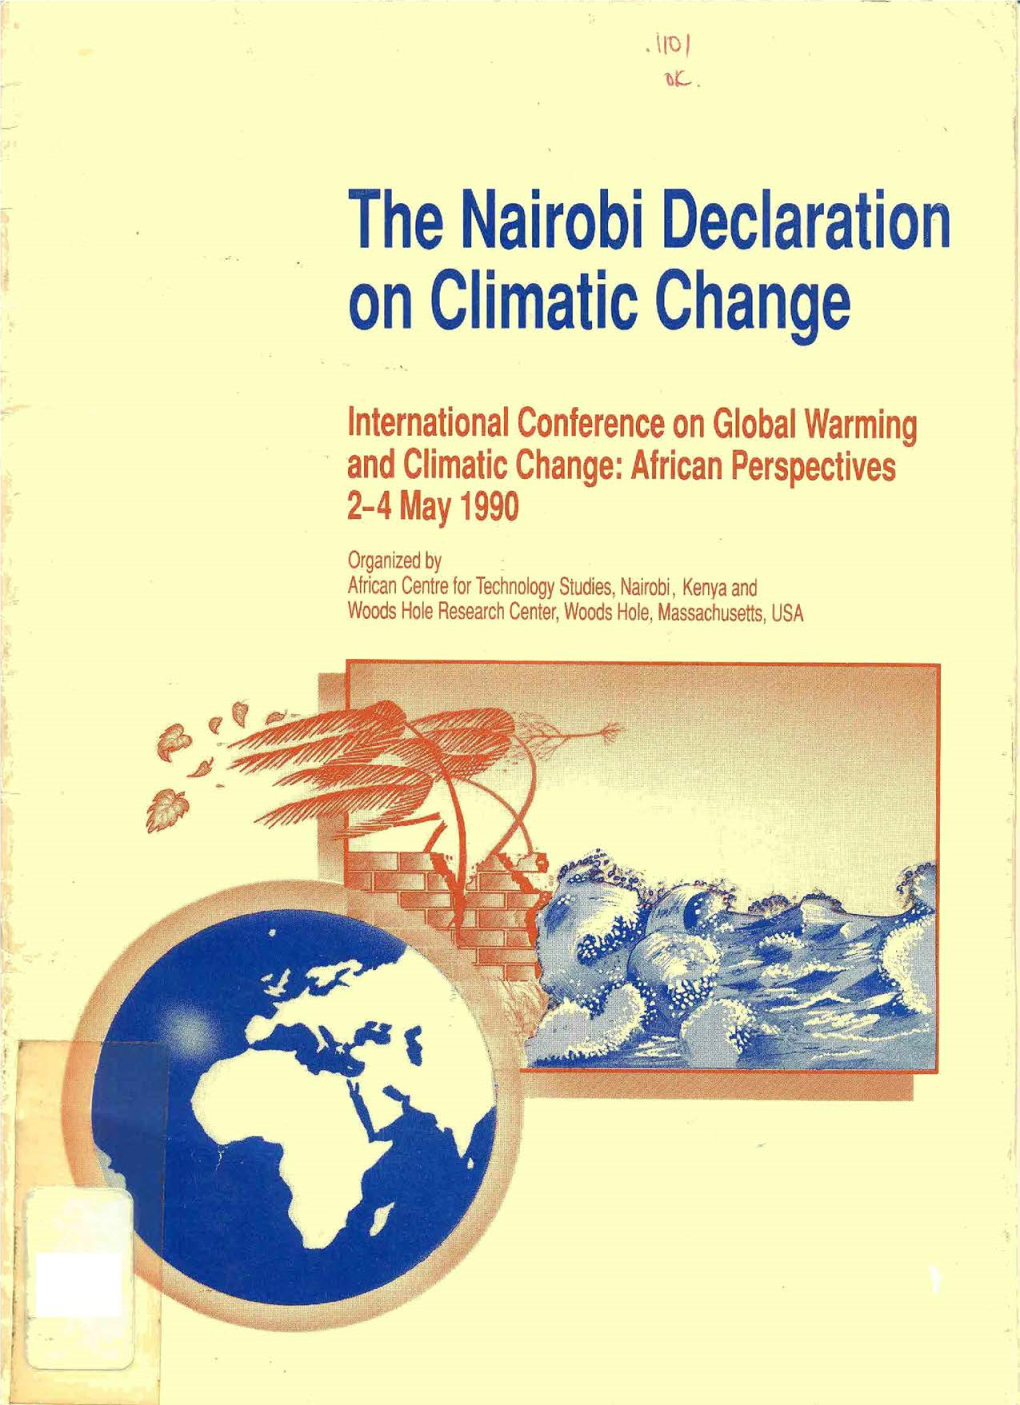 The Nal'rob'i Declaration on Climatic Change the NAIROBI DECLARATION on CLIMATIC CHANGE